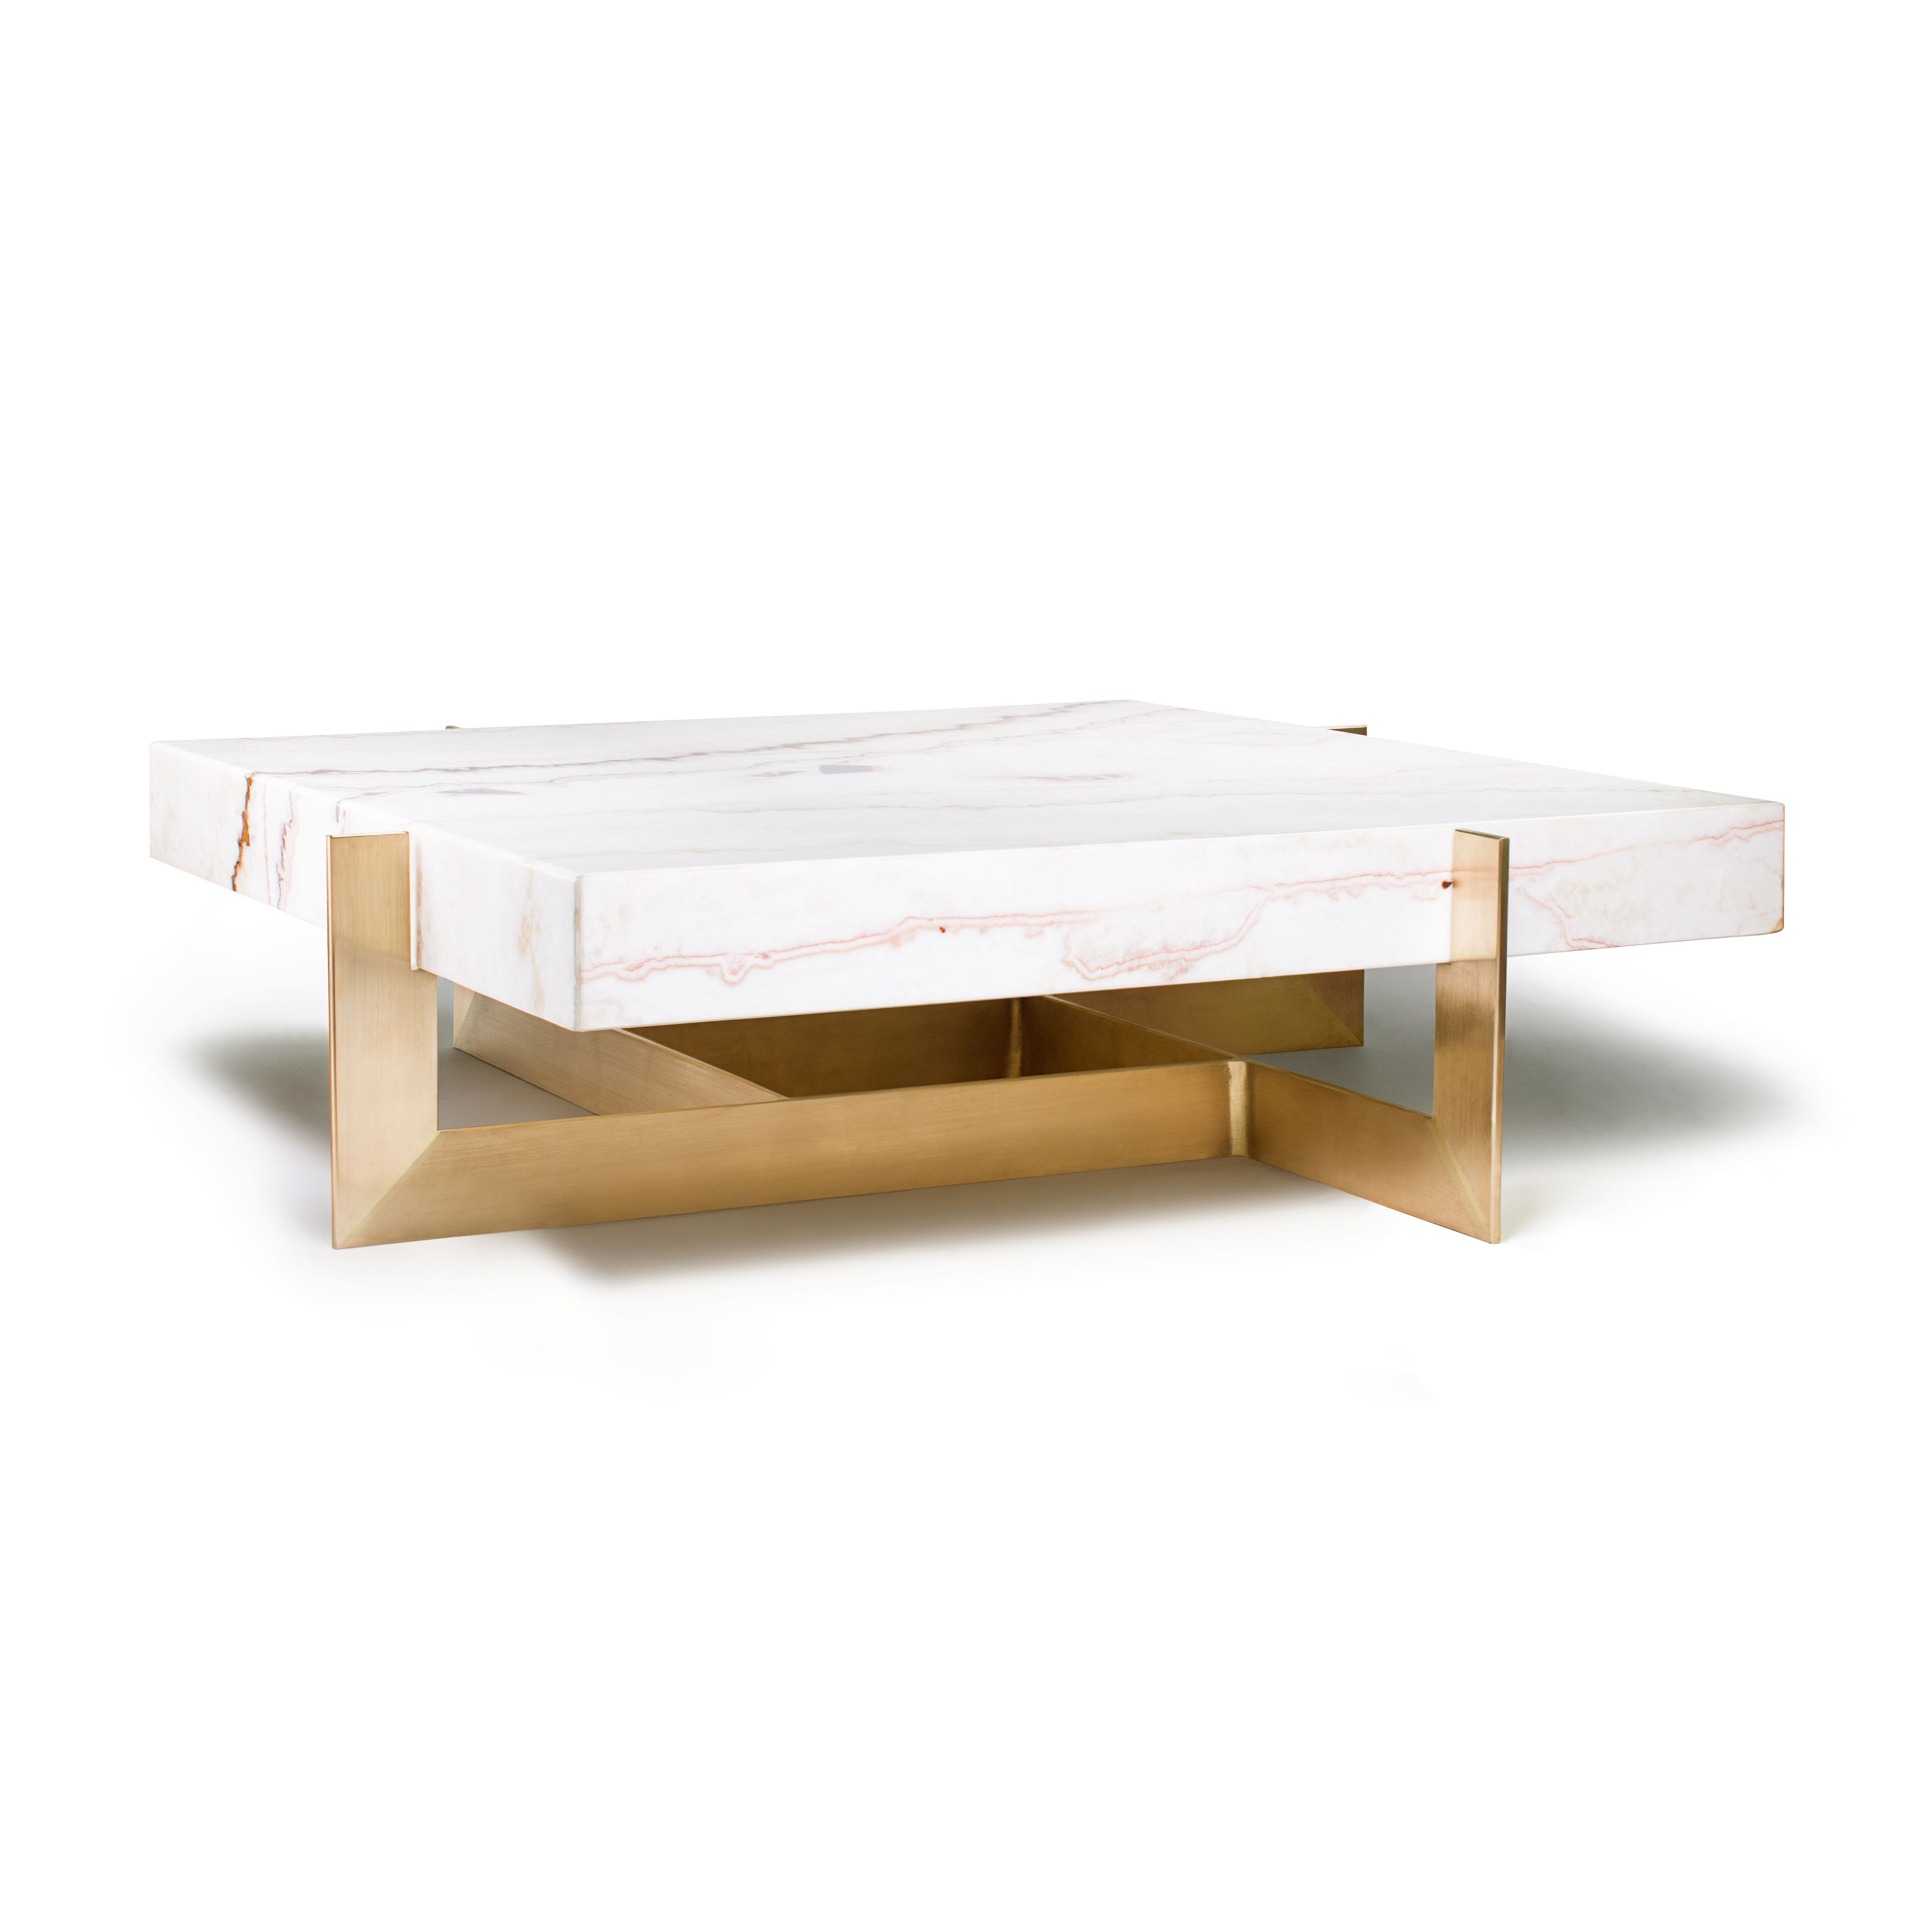 Solid Marble Coffee Table / Naples Carrera Marble Coffee Table Set Of 3 Shop Now : It is found around the world and varies in color, typically white, gray, green, pink, brown, blue, black and several combinations of colors.